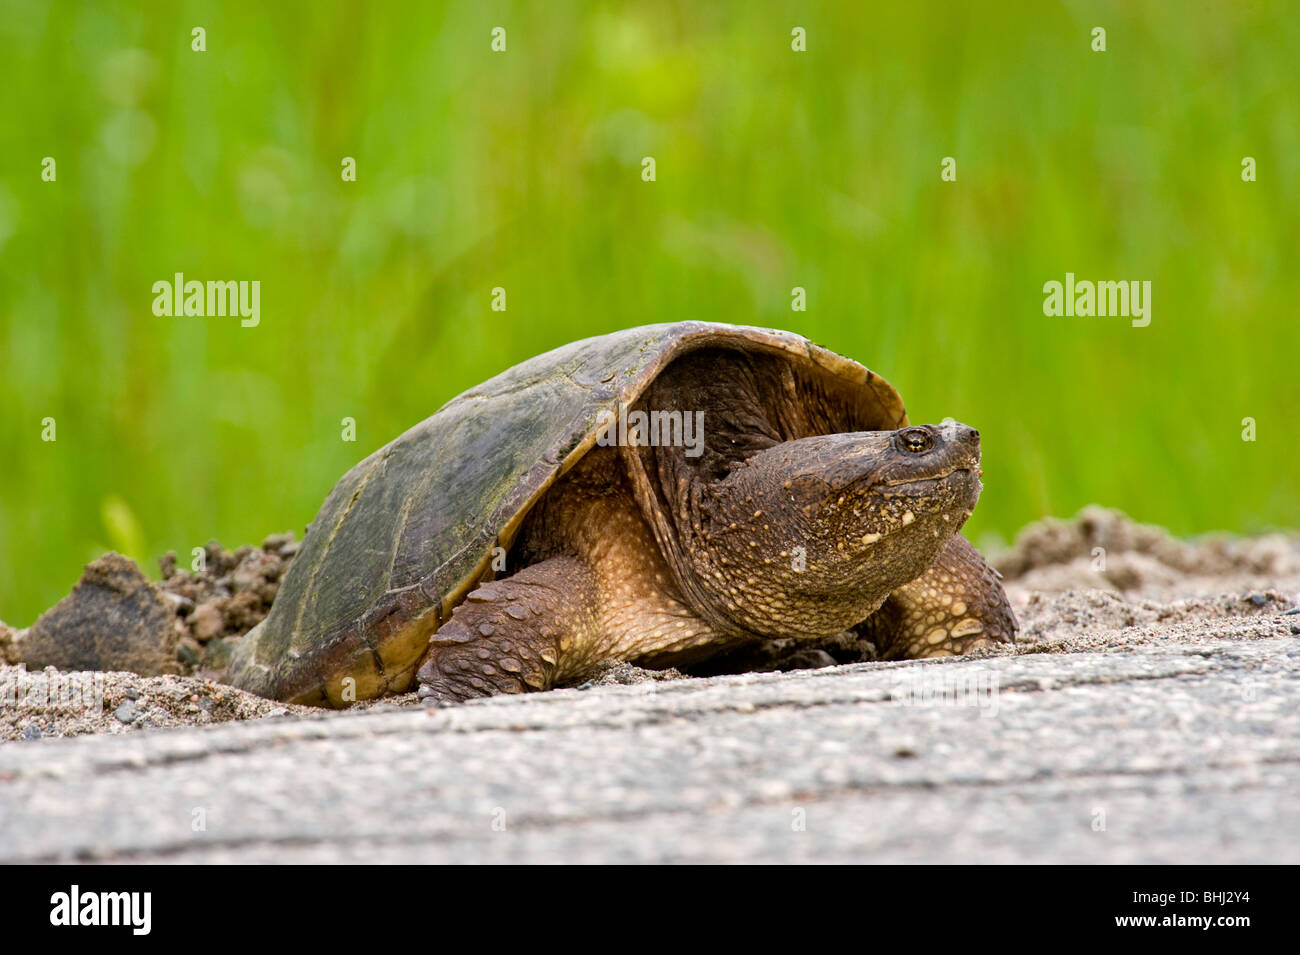 Snapping turtle (Chelydra serpentina) Female laying eggs in roadside gravel, Greater Sudbury, Ontario, Canada Stock Photo